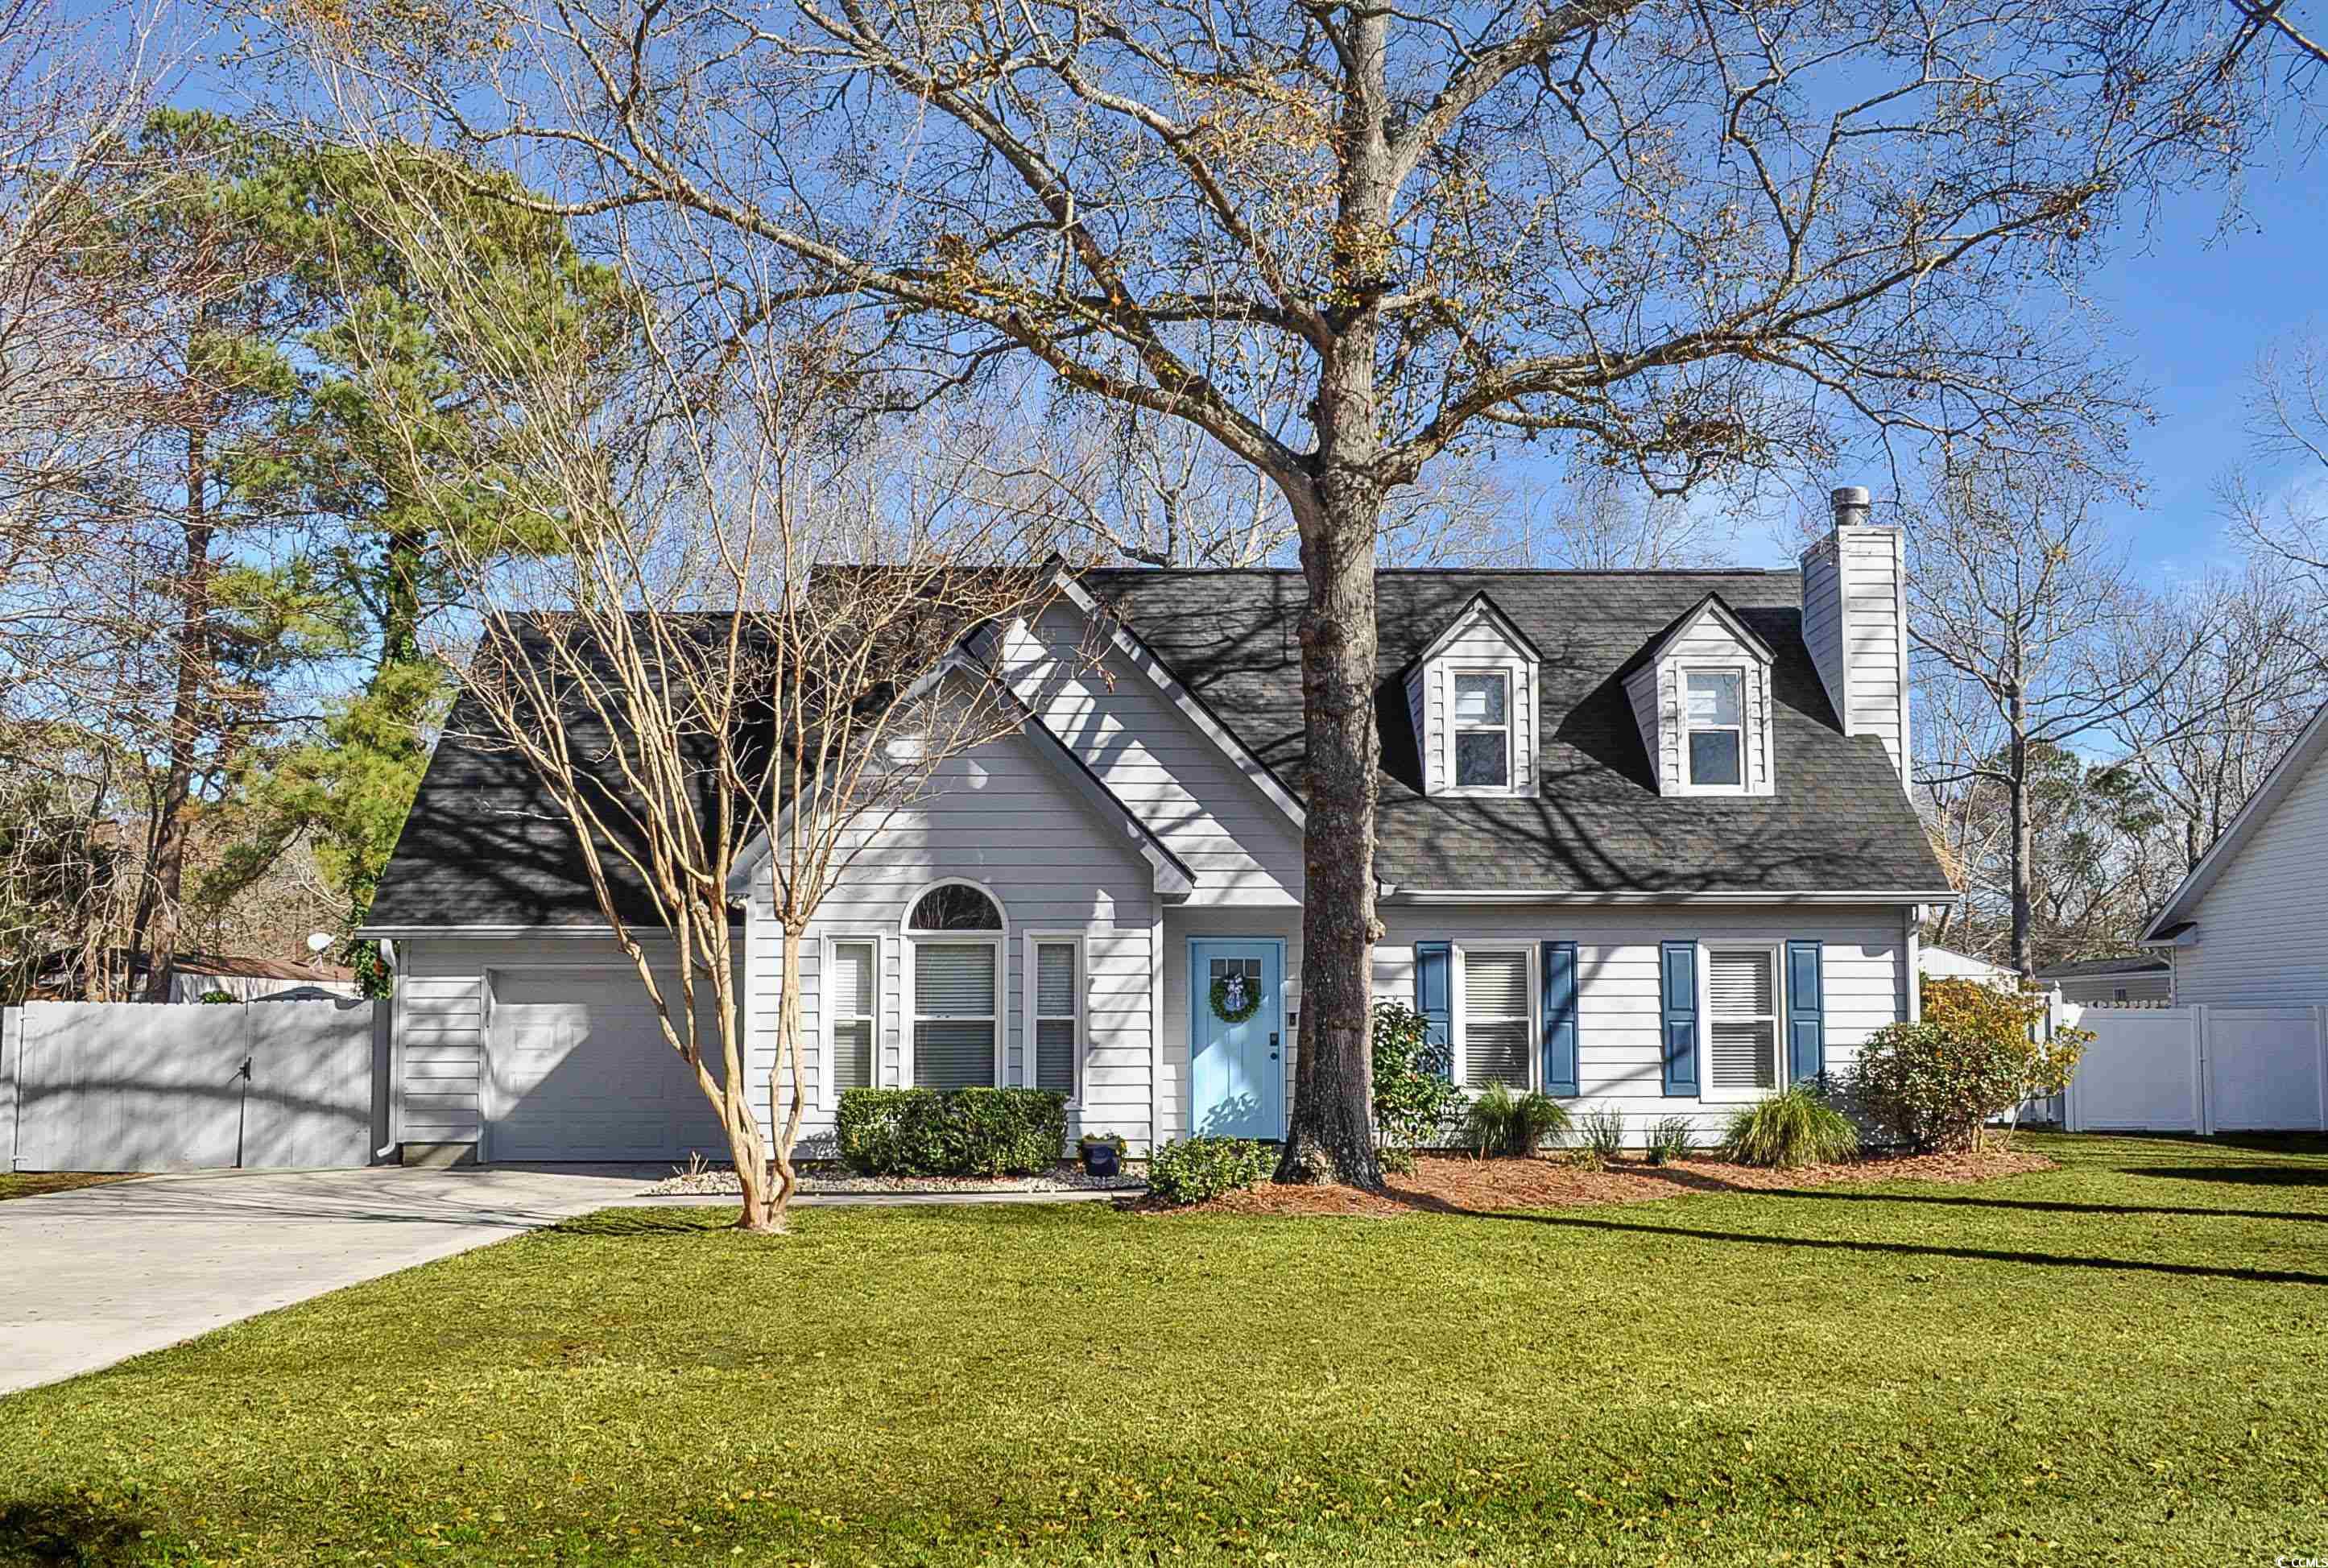 758 Mount Gilead Place Dr. Murrells Inlet, SC 29576